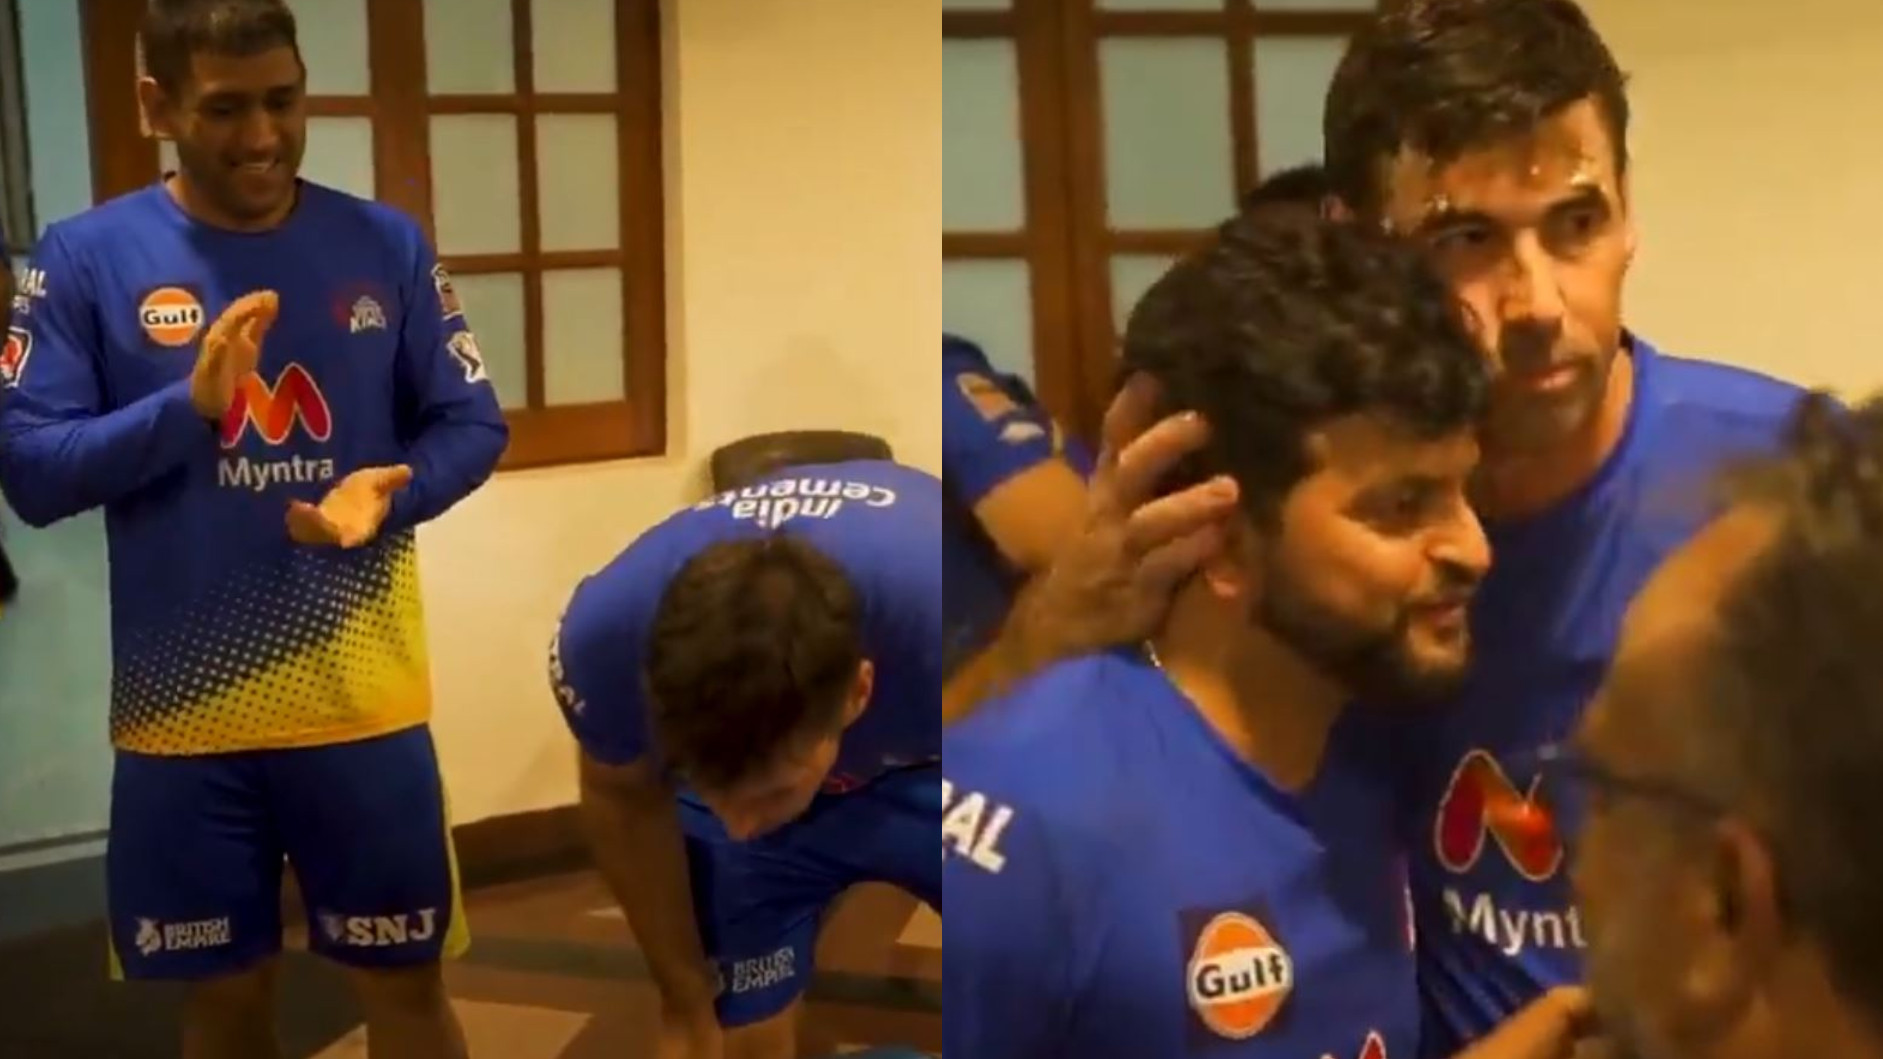 IPL 2021: WATCH- MS Dhoni and Chennai Super Kings’ team members celebrate coach Stephen Fleming’s birthday